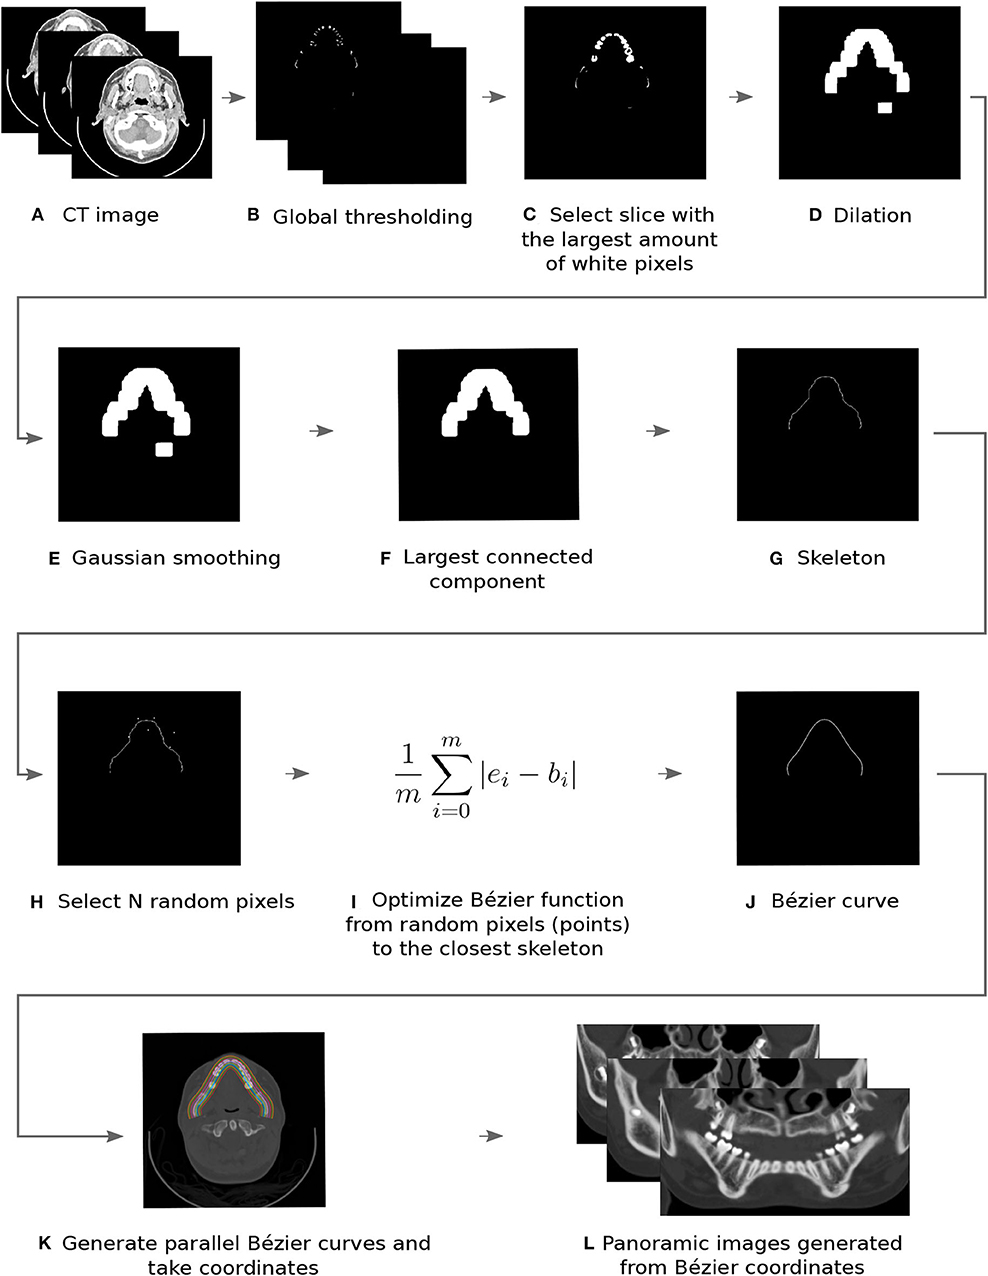 Frontiers Reconstruction Of Panoramic Dental Images Through Bezier Function Optimization Bioengineering And Biotechnology